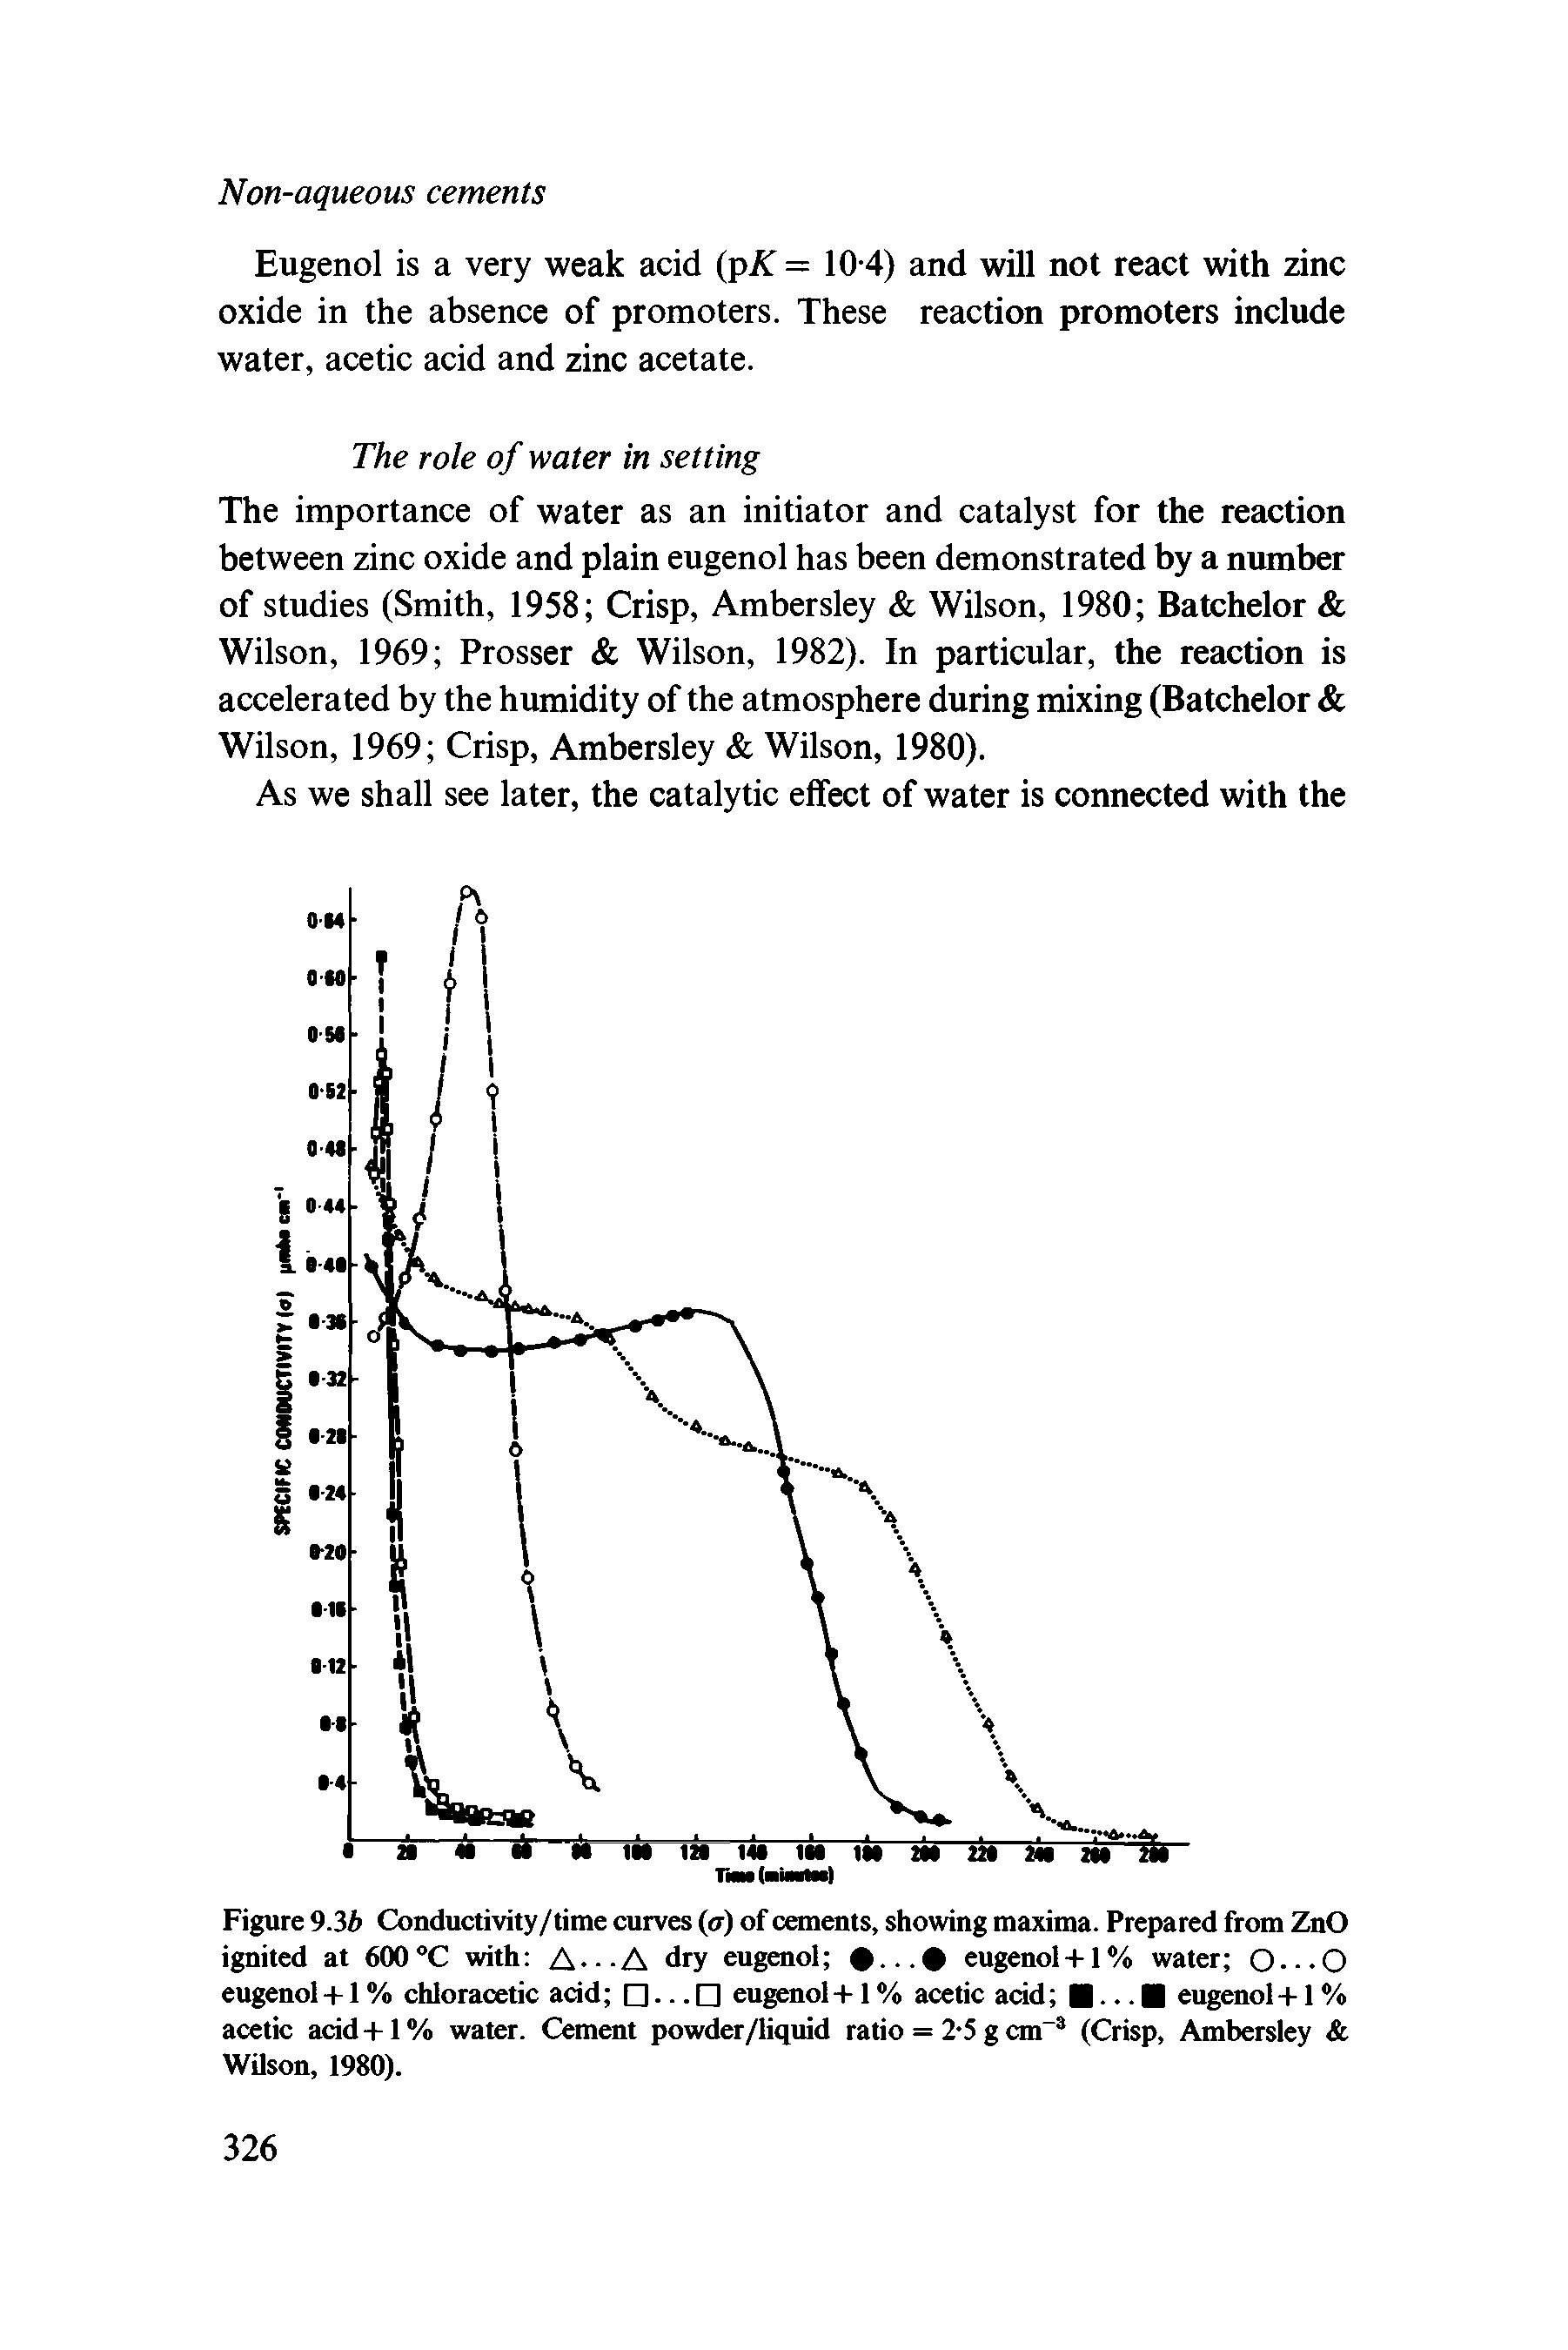 Figure 9.3b Conductivity/time curves (a) of cements, showing maxima. Prepared from ZnO ignited at 600 C with A-.-A dry eugenol 0...0 eugenol + 1% water O-.-O eugenol + 1% chloracetic acid ... eugenol+1% acetic acid ... eugenol+1% acetic acid+1% water. Cement powder/liquid ratio = 2-5 g cm (Crisp, Ambersley Wilson, 1980).